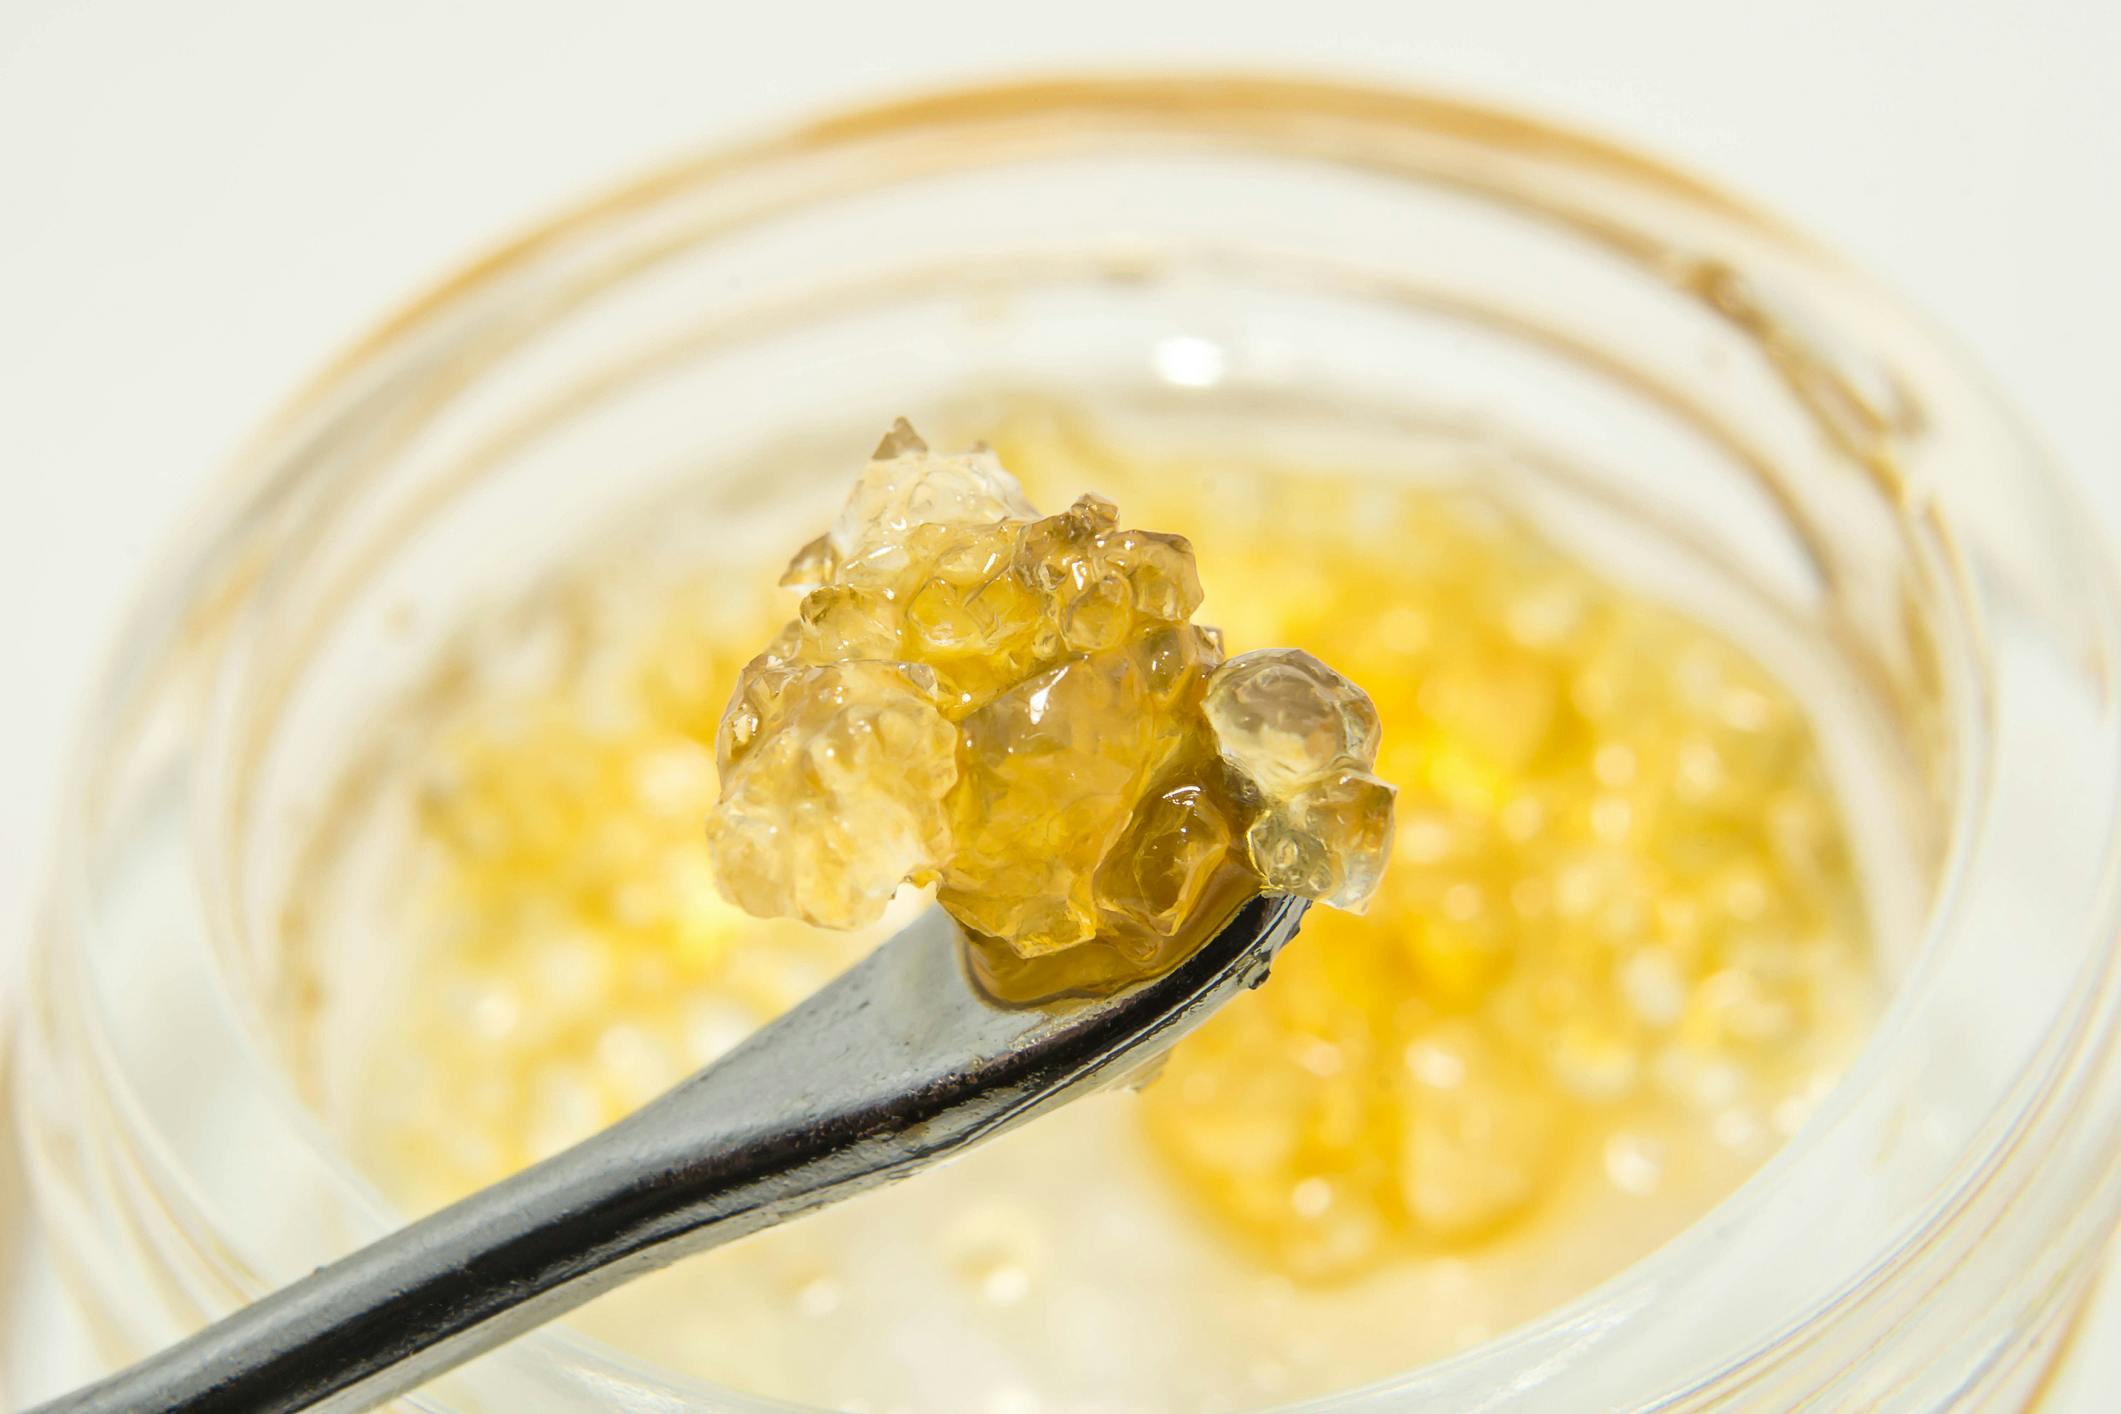 GG4 THCA crystals on a dab tool. Extracted by 710 Savant. Photo by AYEHAB via iStock